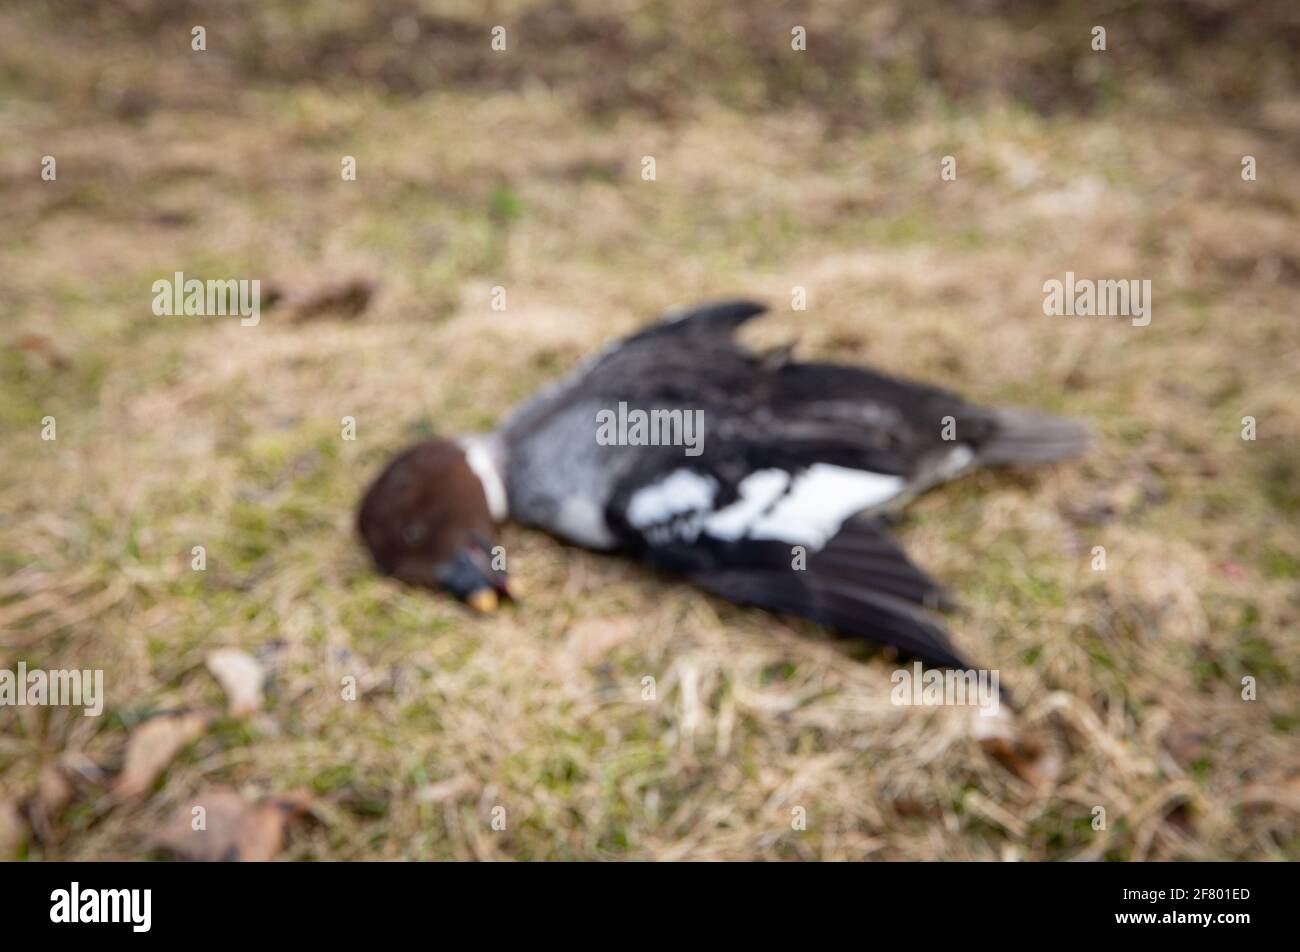 On purpose blurred picture of dead wild bird Common goldeneye, avian influenza known as bird flu concept. (In real life it had flying accident). Stock Photo